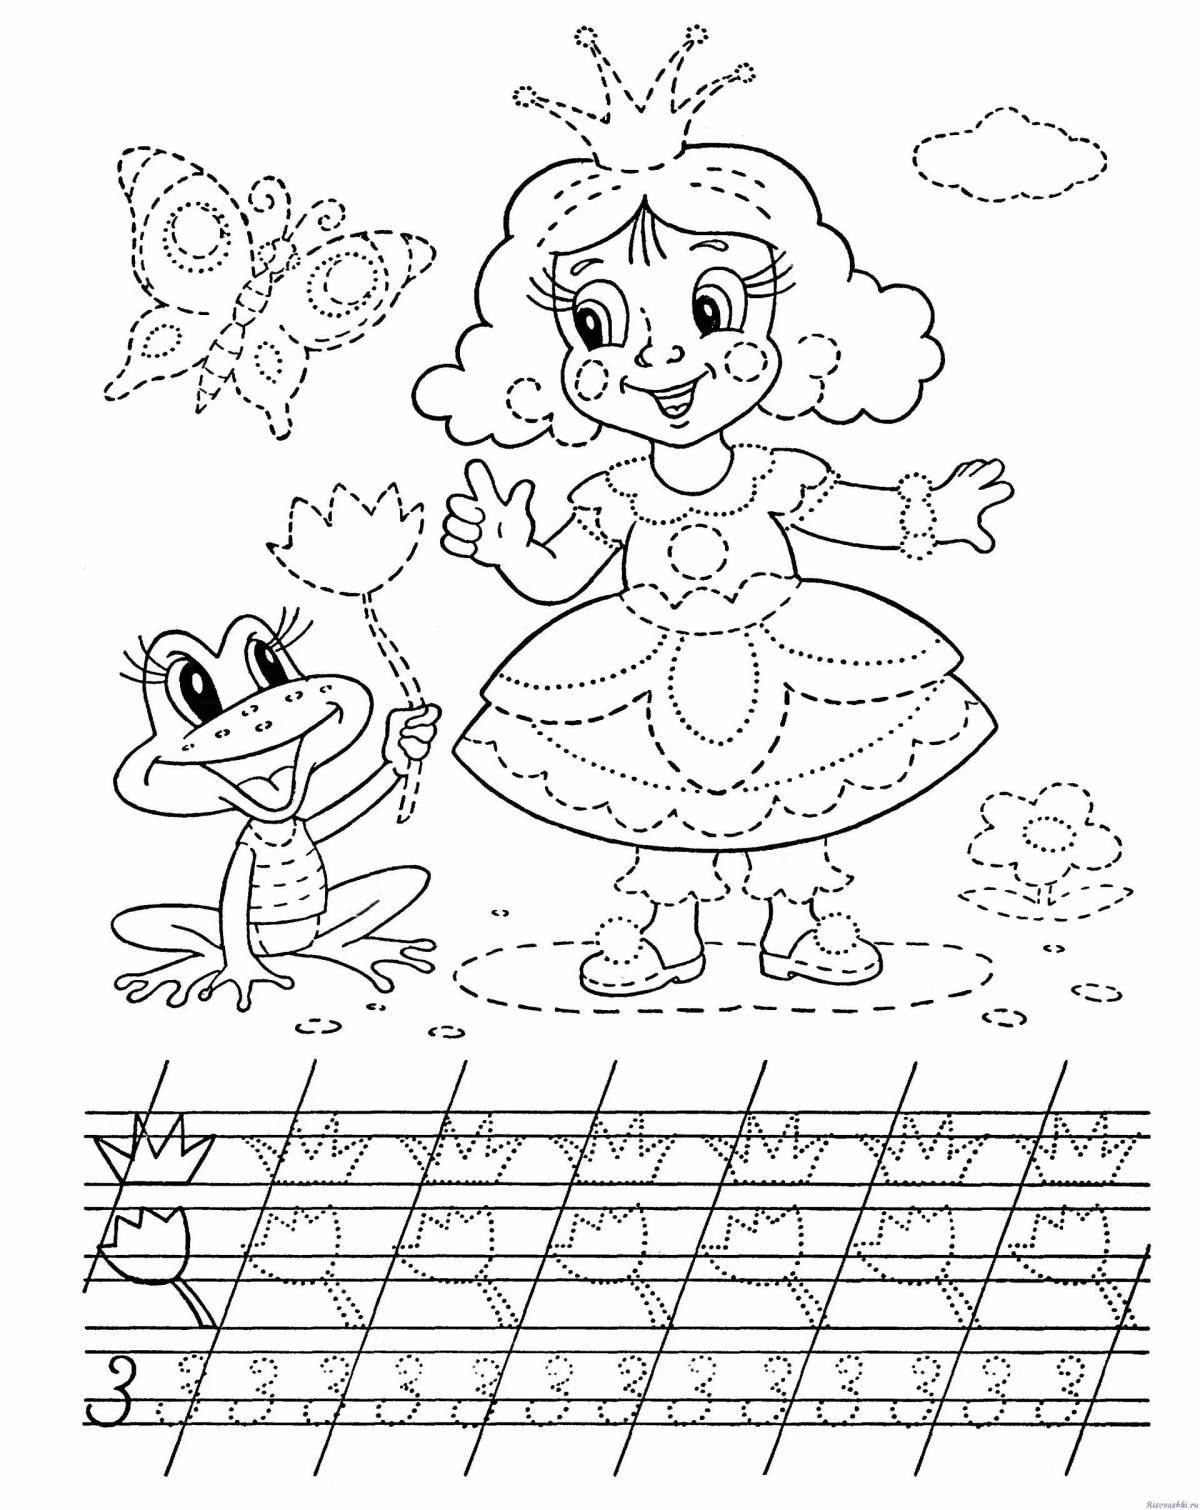 Entertaining educational coloring book for children 5-6 years old